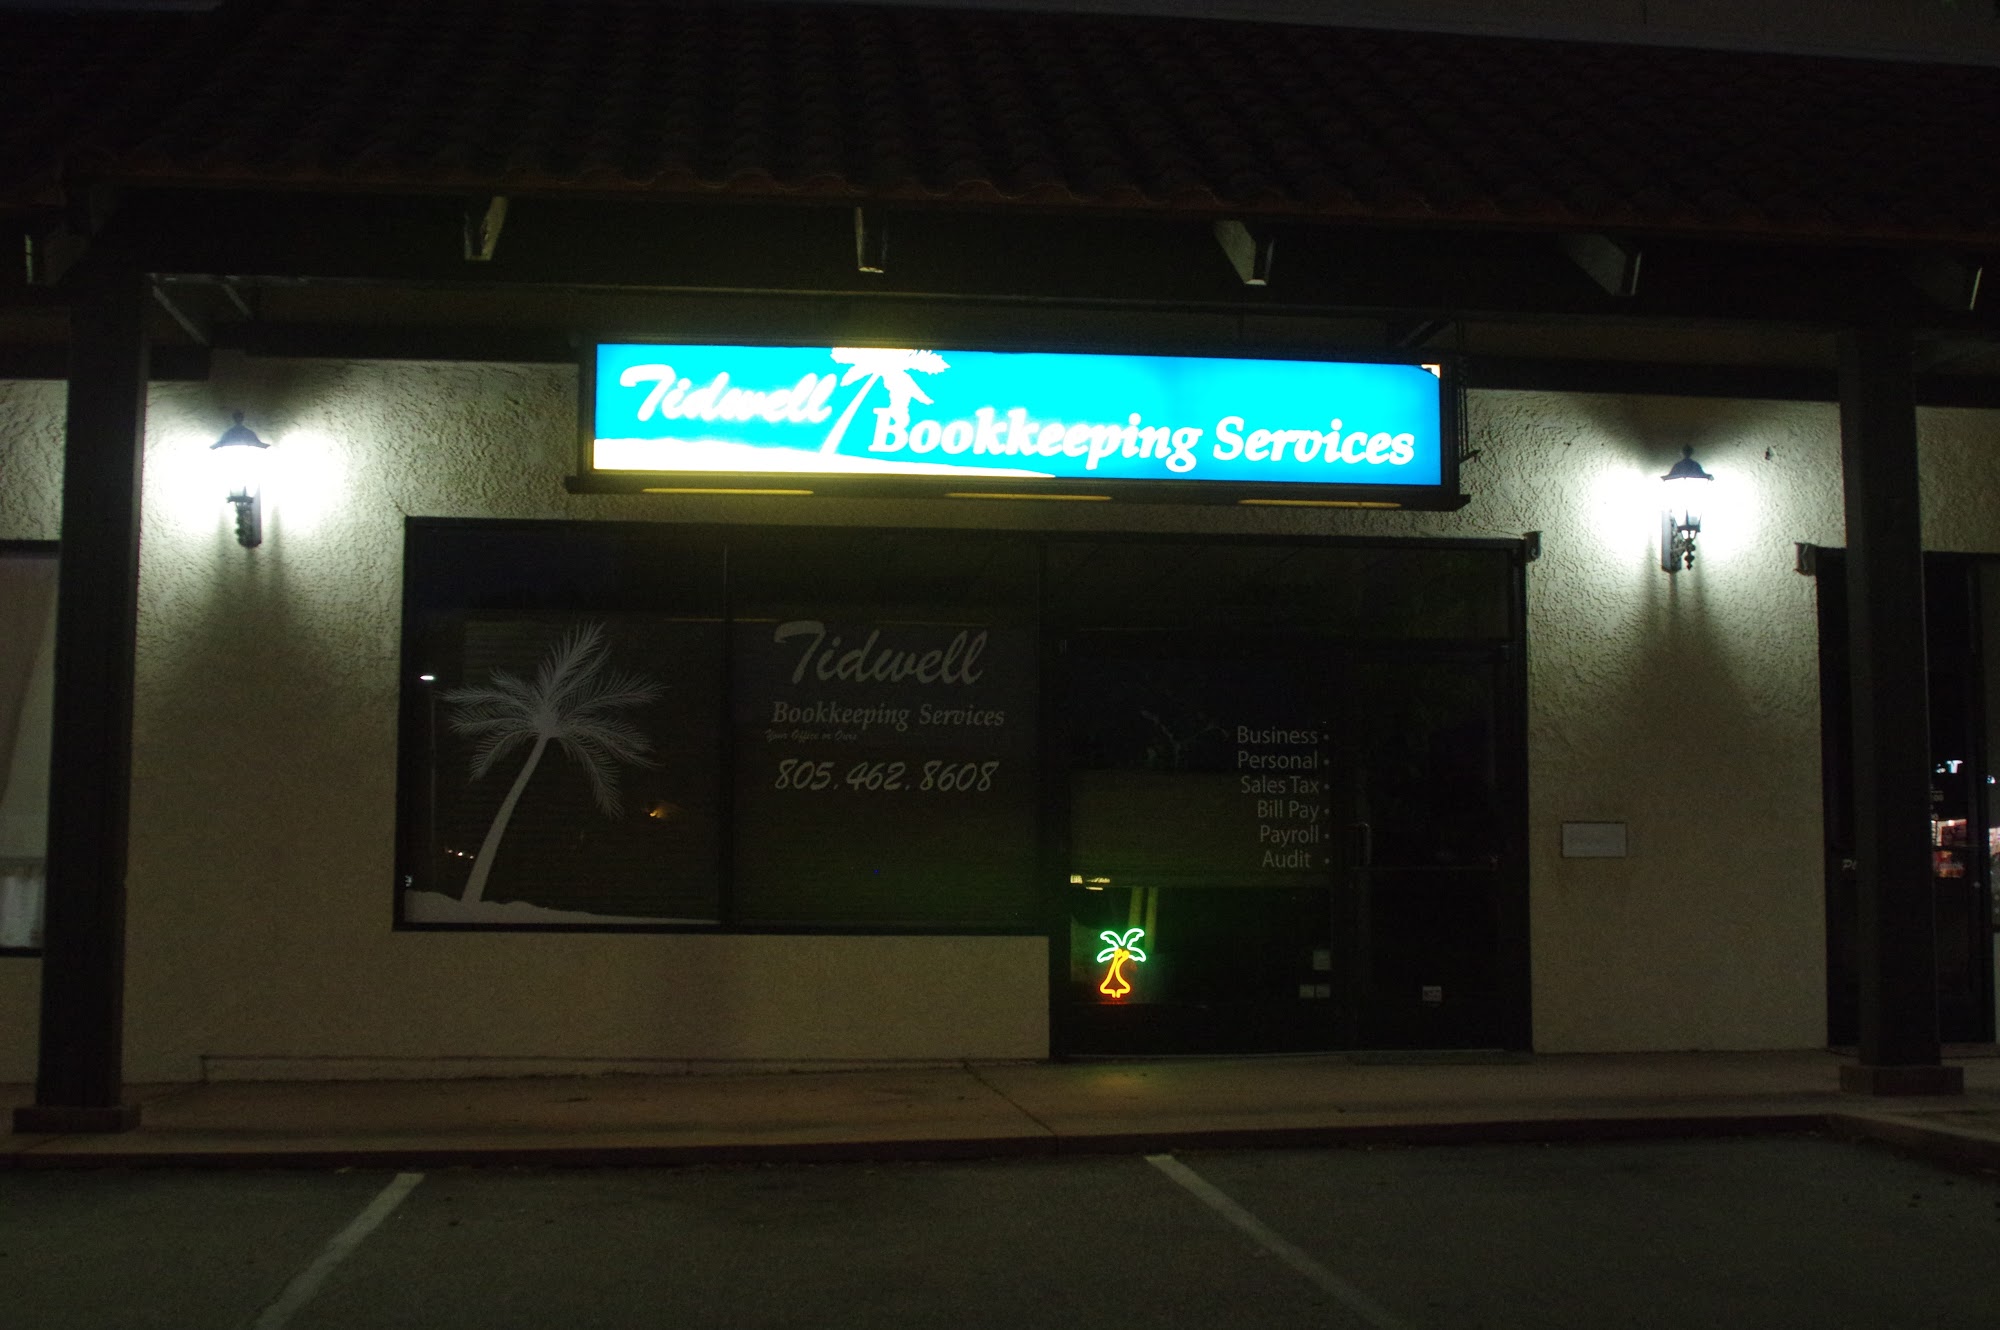 Tidwell Bookkeeping Services